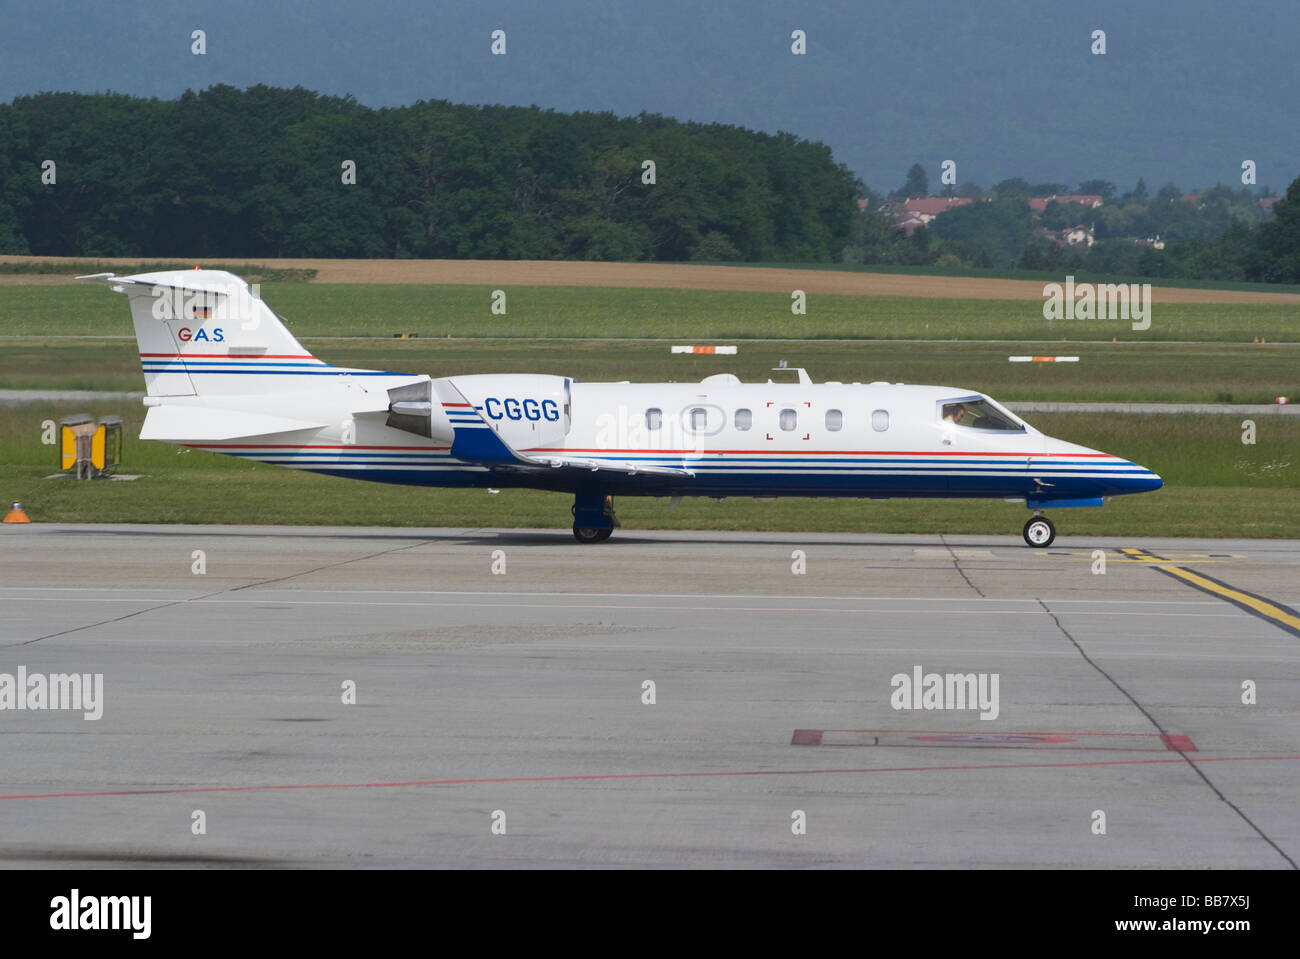 Bombardier Learjet 31A D-CGGG Business Jet Taxiing at Geneva Airport switzerland Geneve Suisse Stock Photo